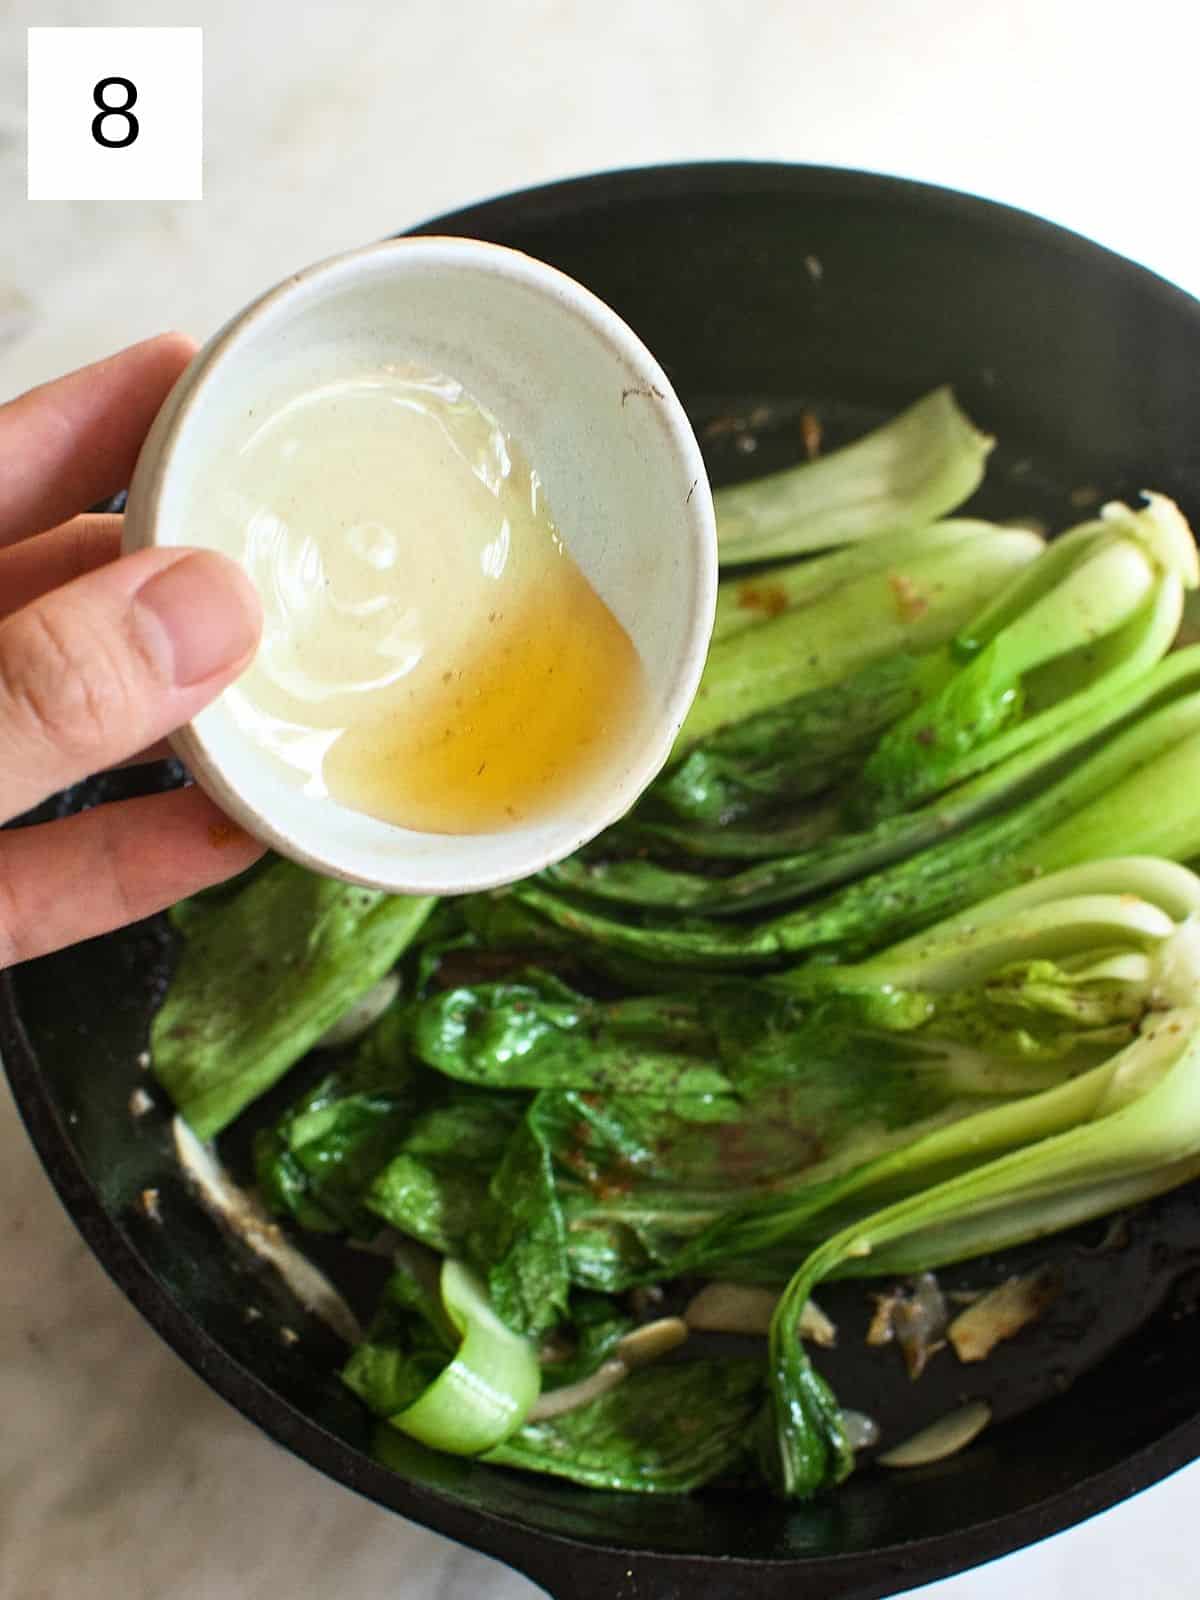 drizzling honey over seasoned bok choy for additional flavor.